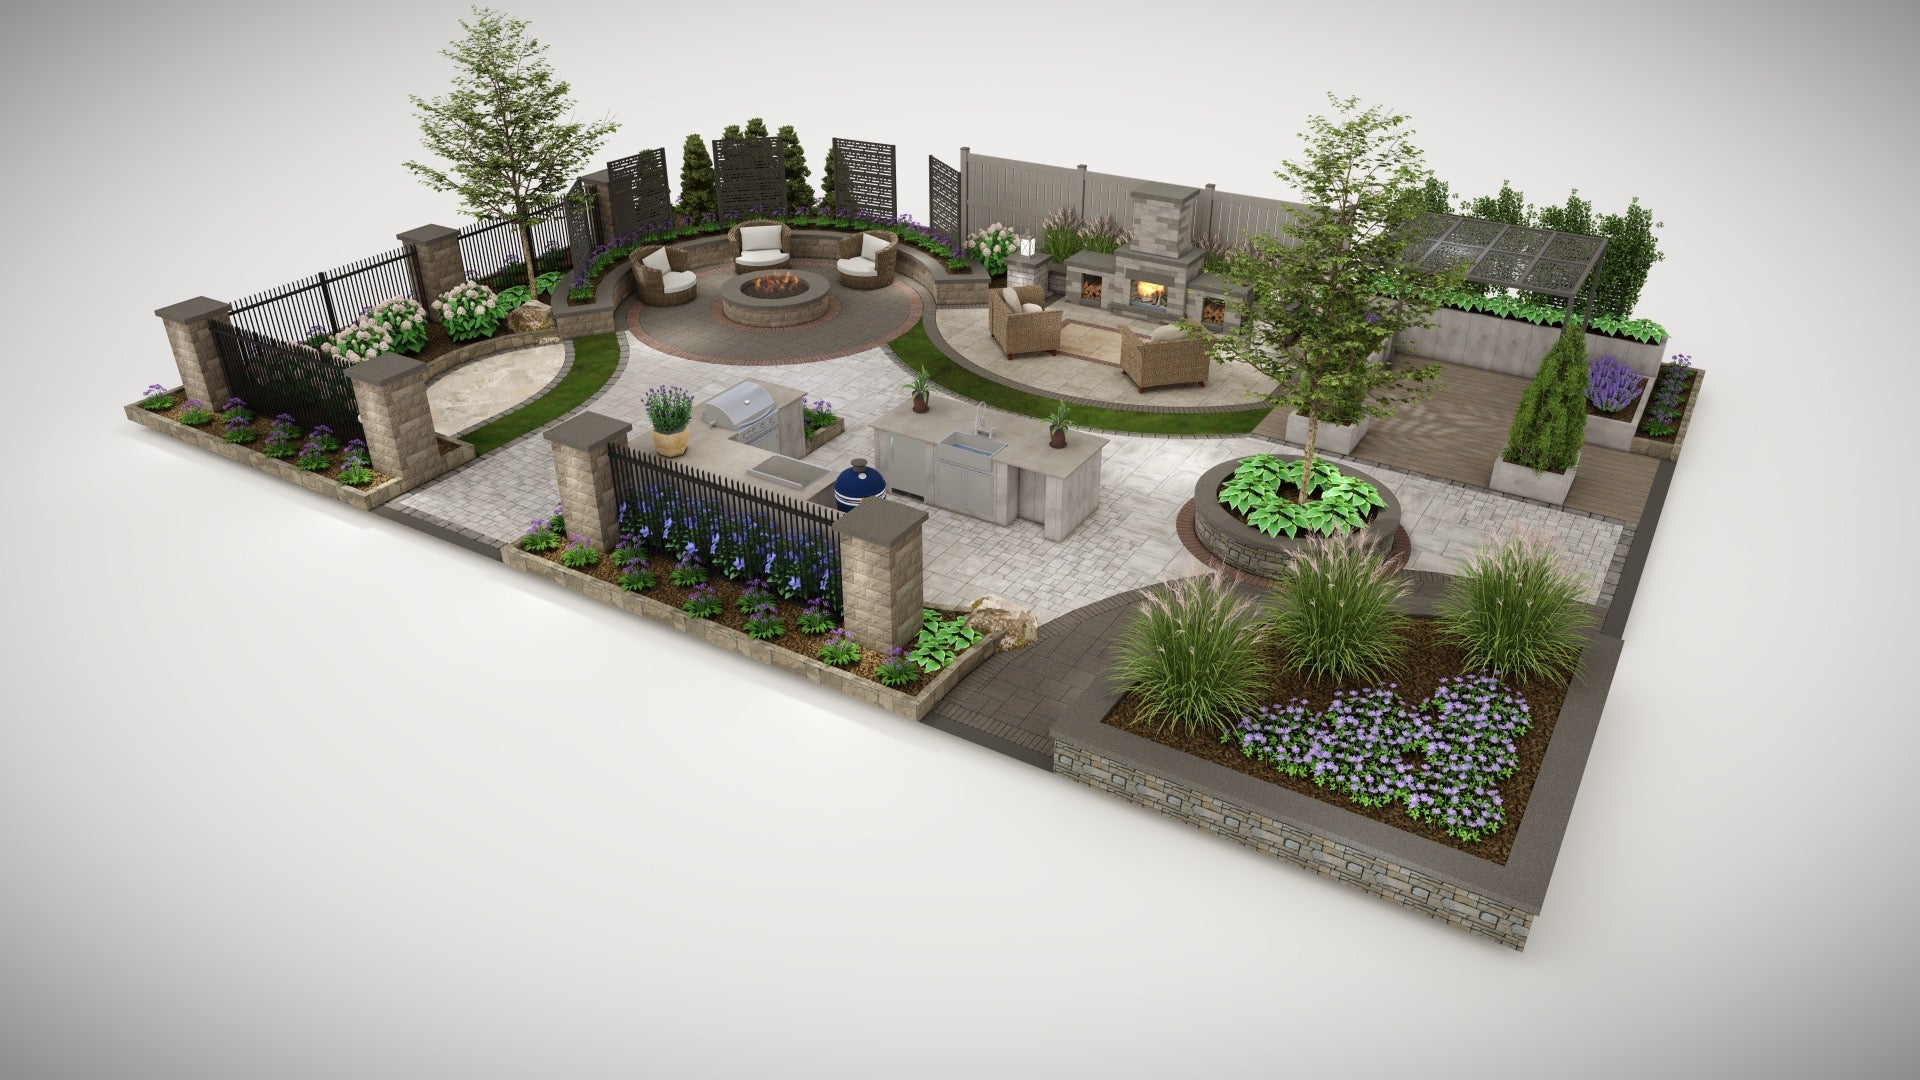 Renderings of six inspirational areas for outdoor transformations. For Belgard Booth at the Philly Flower Show.